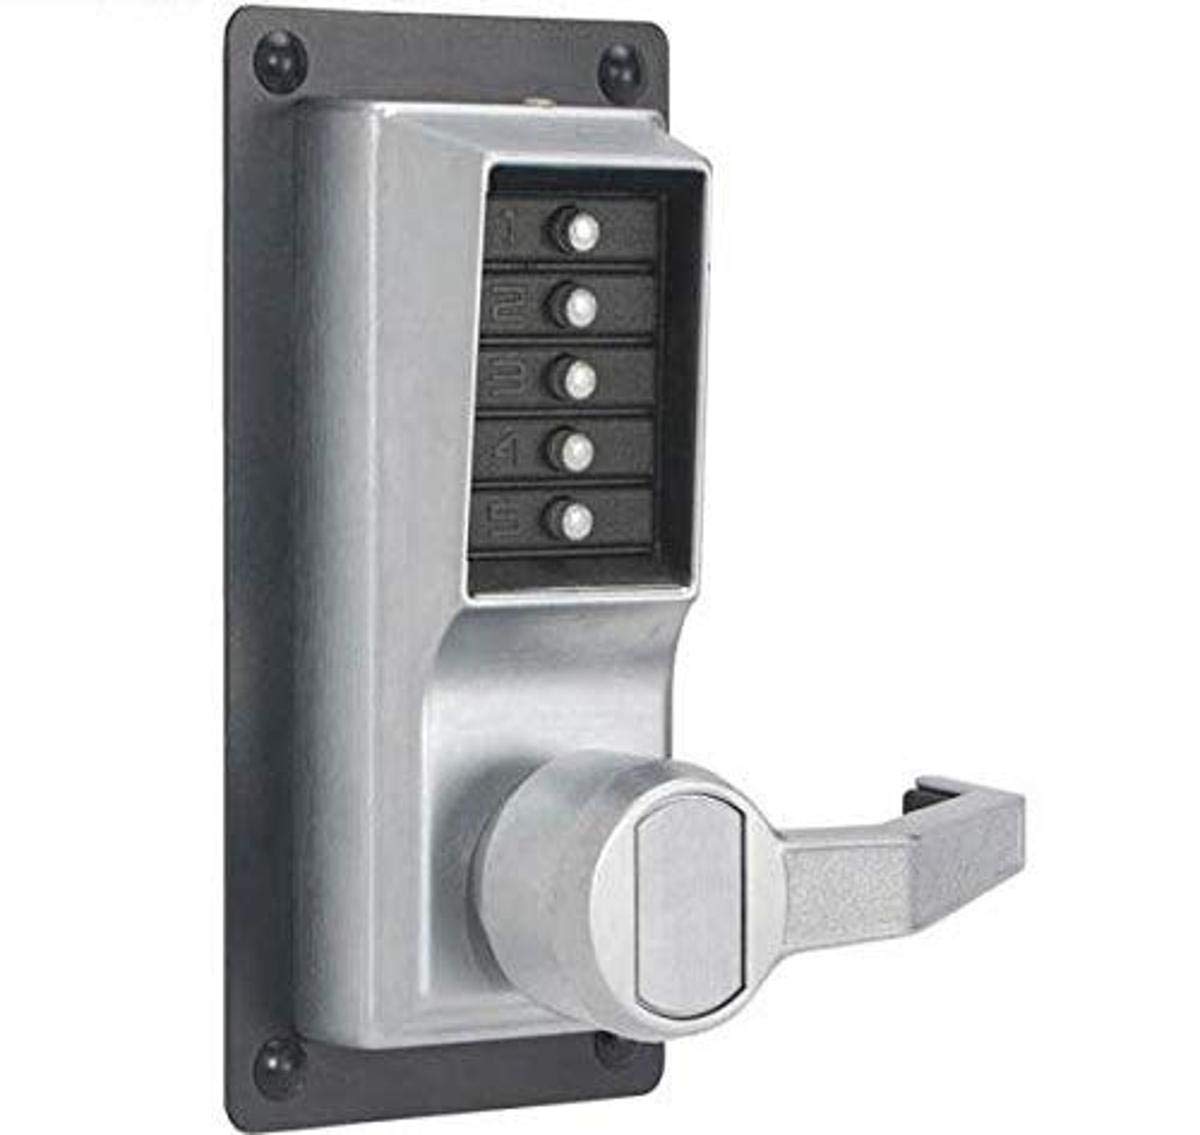 Kaba Simplex LP1000 Series Metal Mechanical Pushbutton Exit Trim Lock with Lever, Combination Entry Only, No Key Override, Satin Chrome Finish, Right Hand